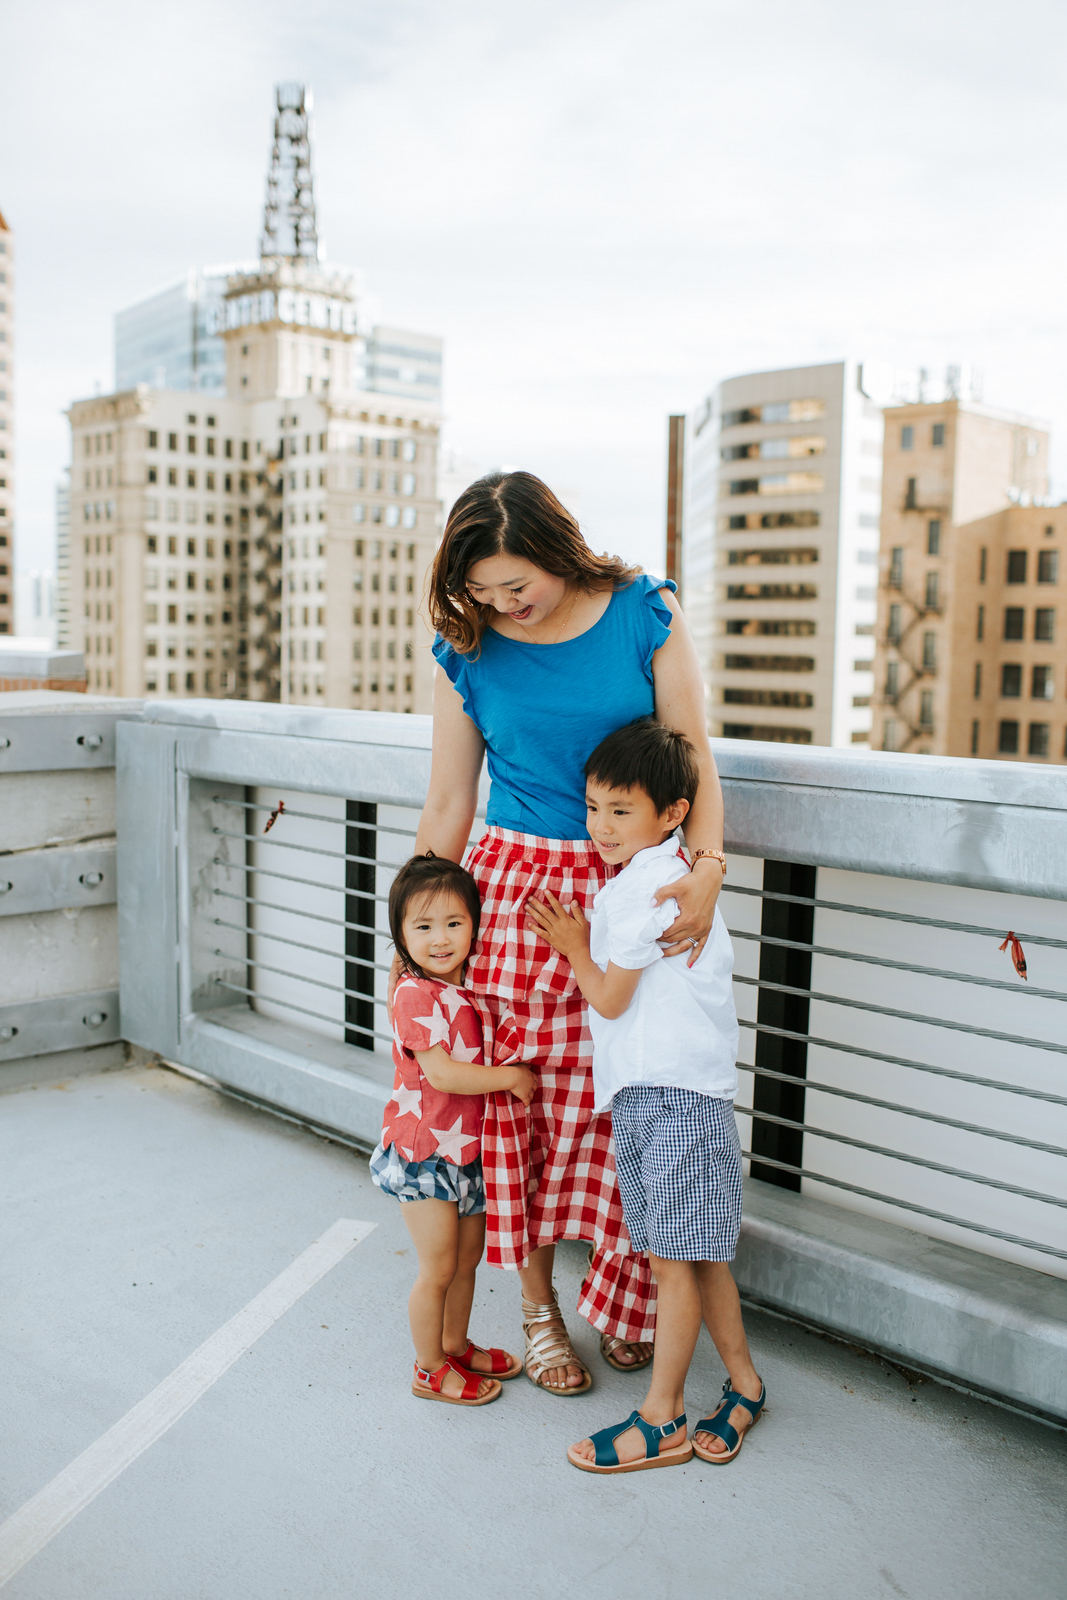 Happy 4th of July! - Red, White, and Blue Patriotic Outfits for the Whole Family by Utah fashion blogger Sandy A La Mode